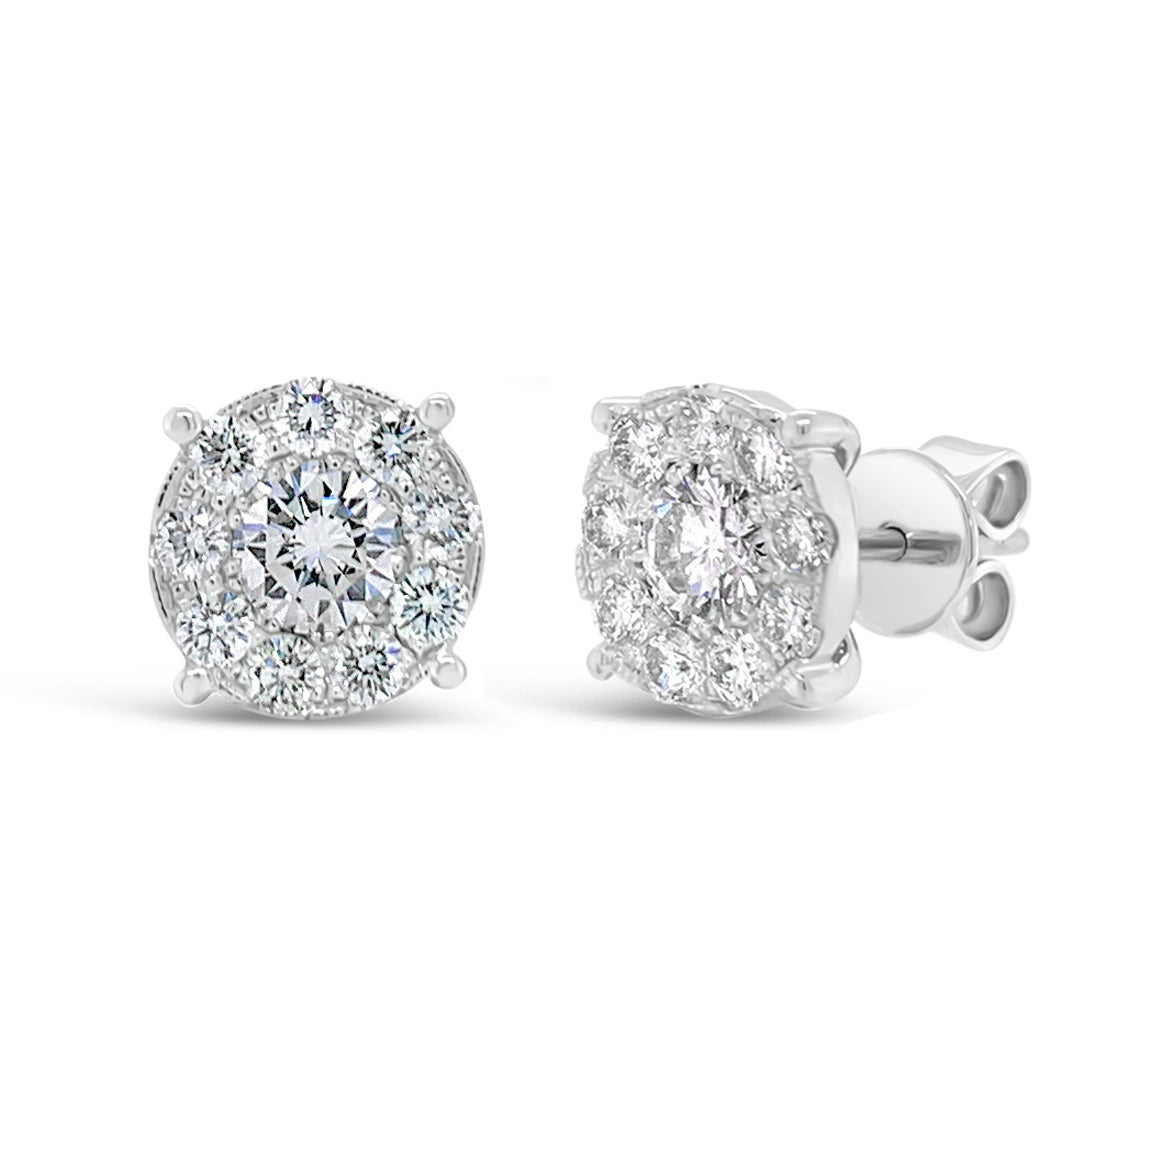 1.46 ct round diamond cluster earrings -14K gold weighing 3.1 grams  -18 round diamonds totaling 0.76 carats   -2 round brilliant-cut diamonds totaling 0.70 carats***